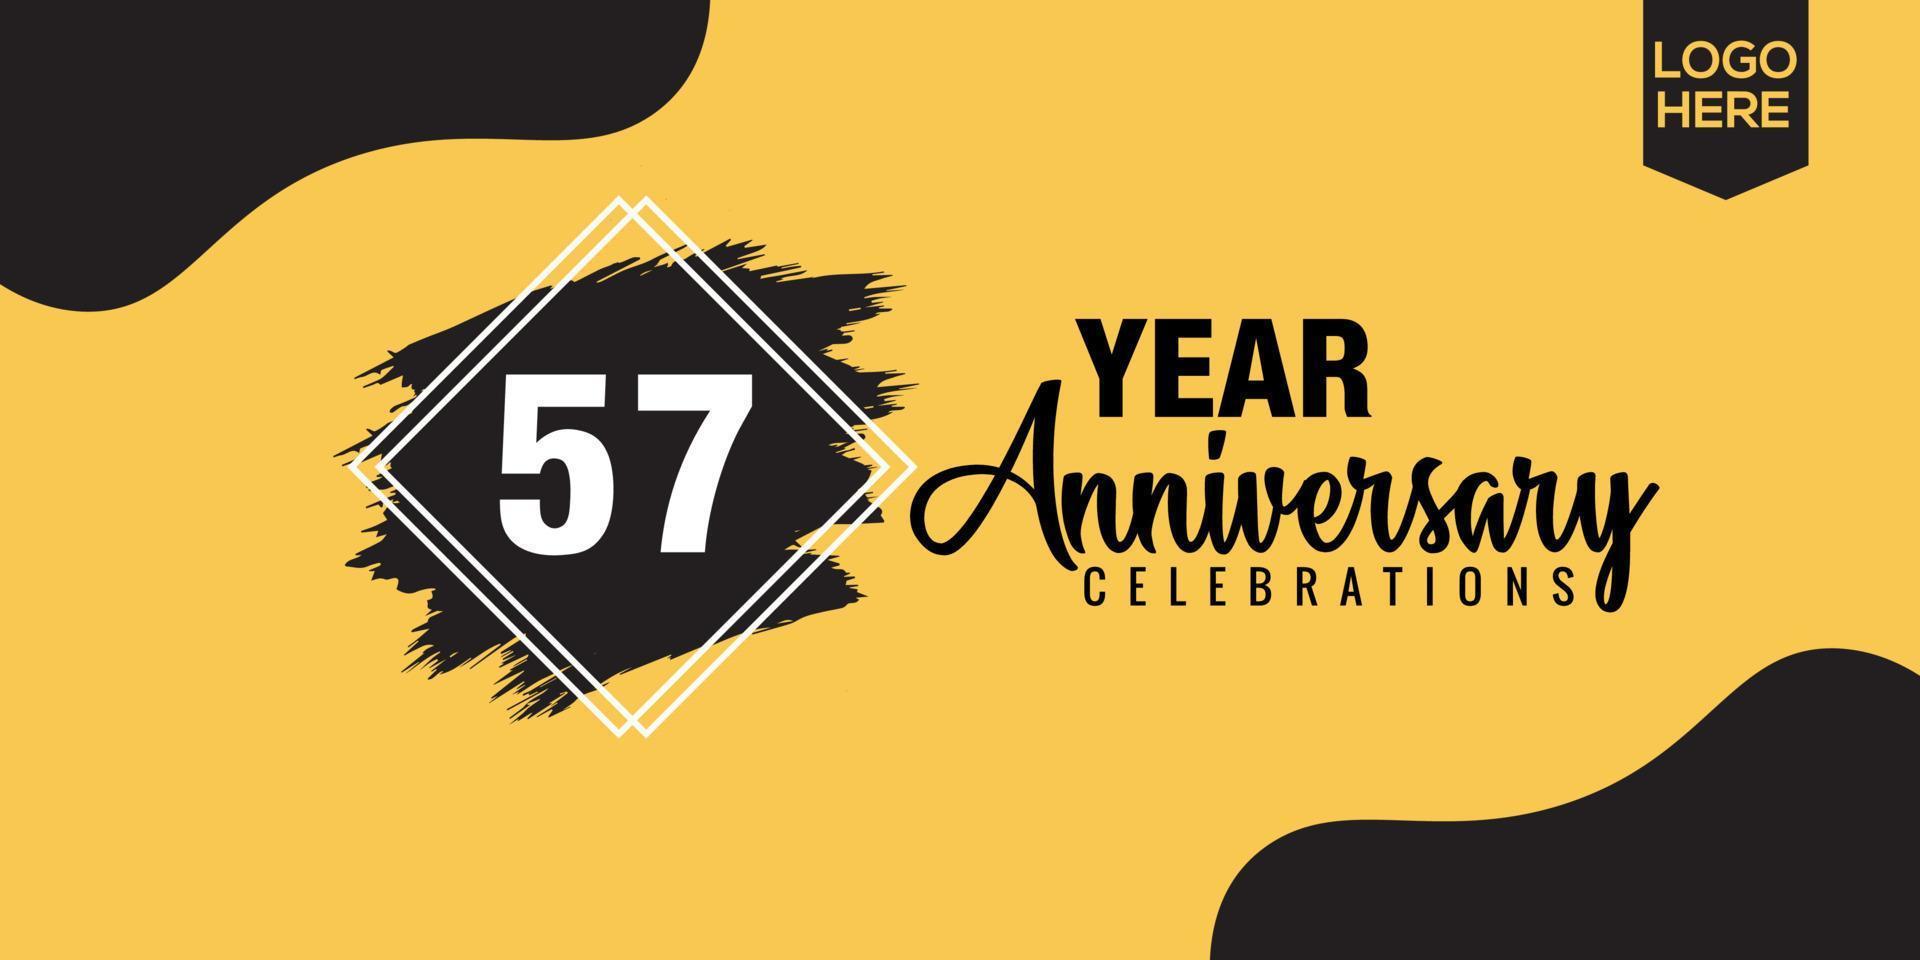 57th years anniversary celebration logo design with black brush and yellow color with black abstract vector illustration